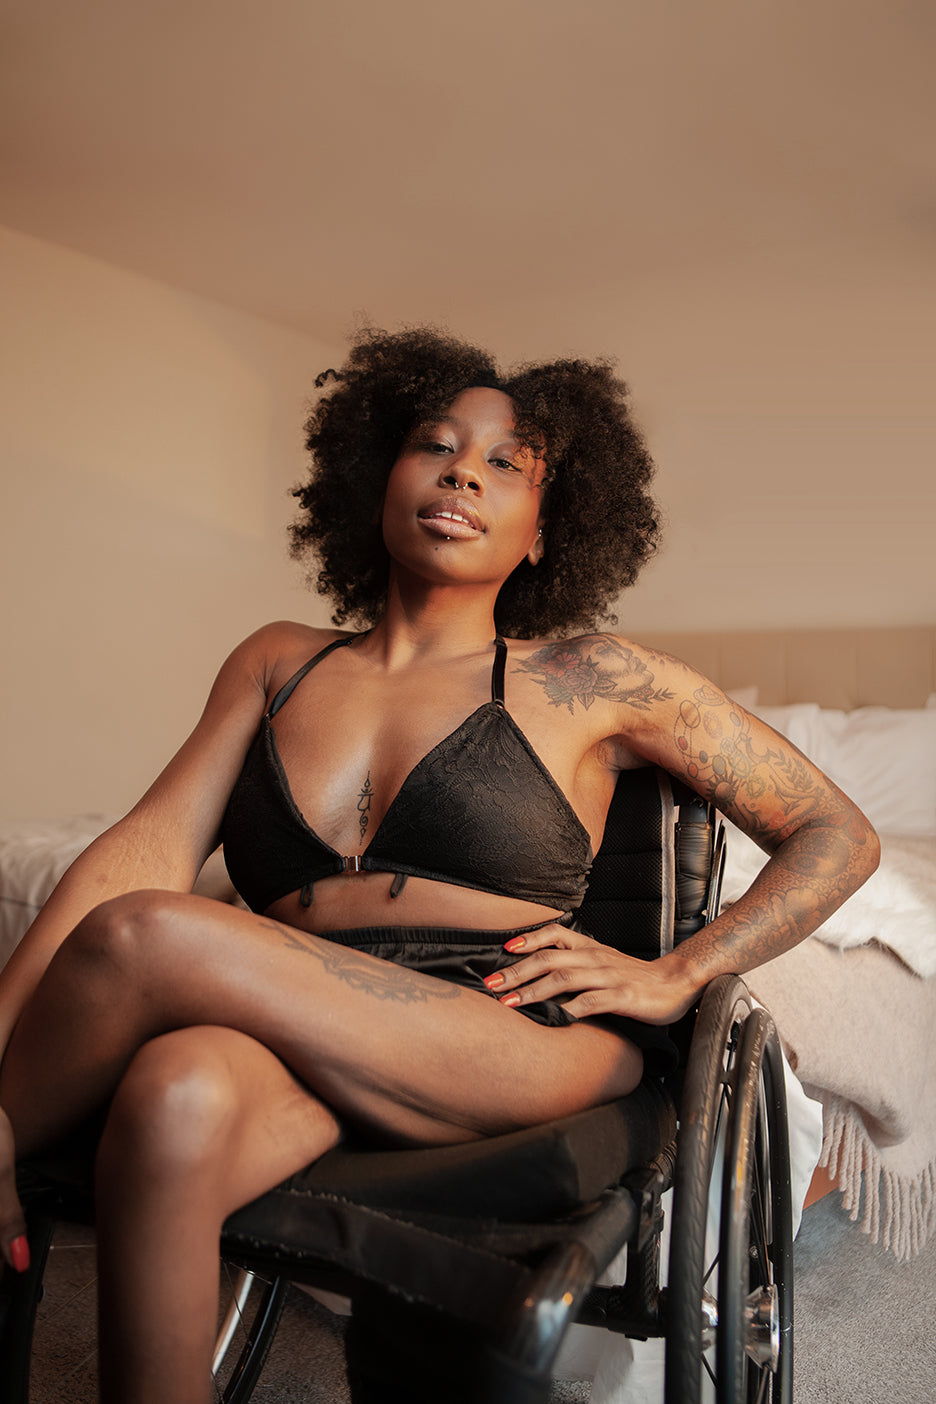 A Liberare model sits in her manual wheelchair wearing very sexy Liberare underwear and bra, with her hand on her hip and her legs crossed. She's in a bedroom with a bed behind her and beige walls.